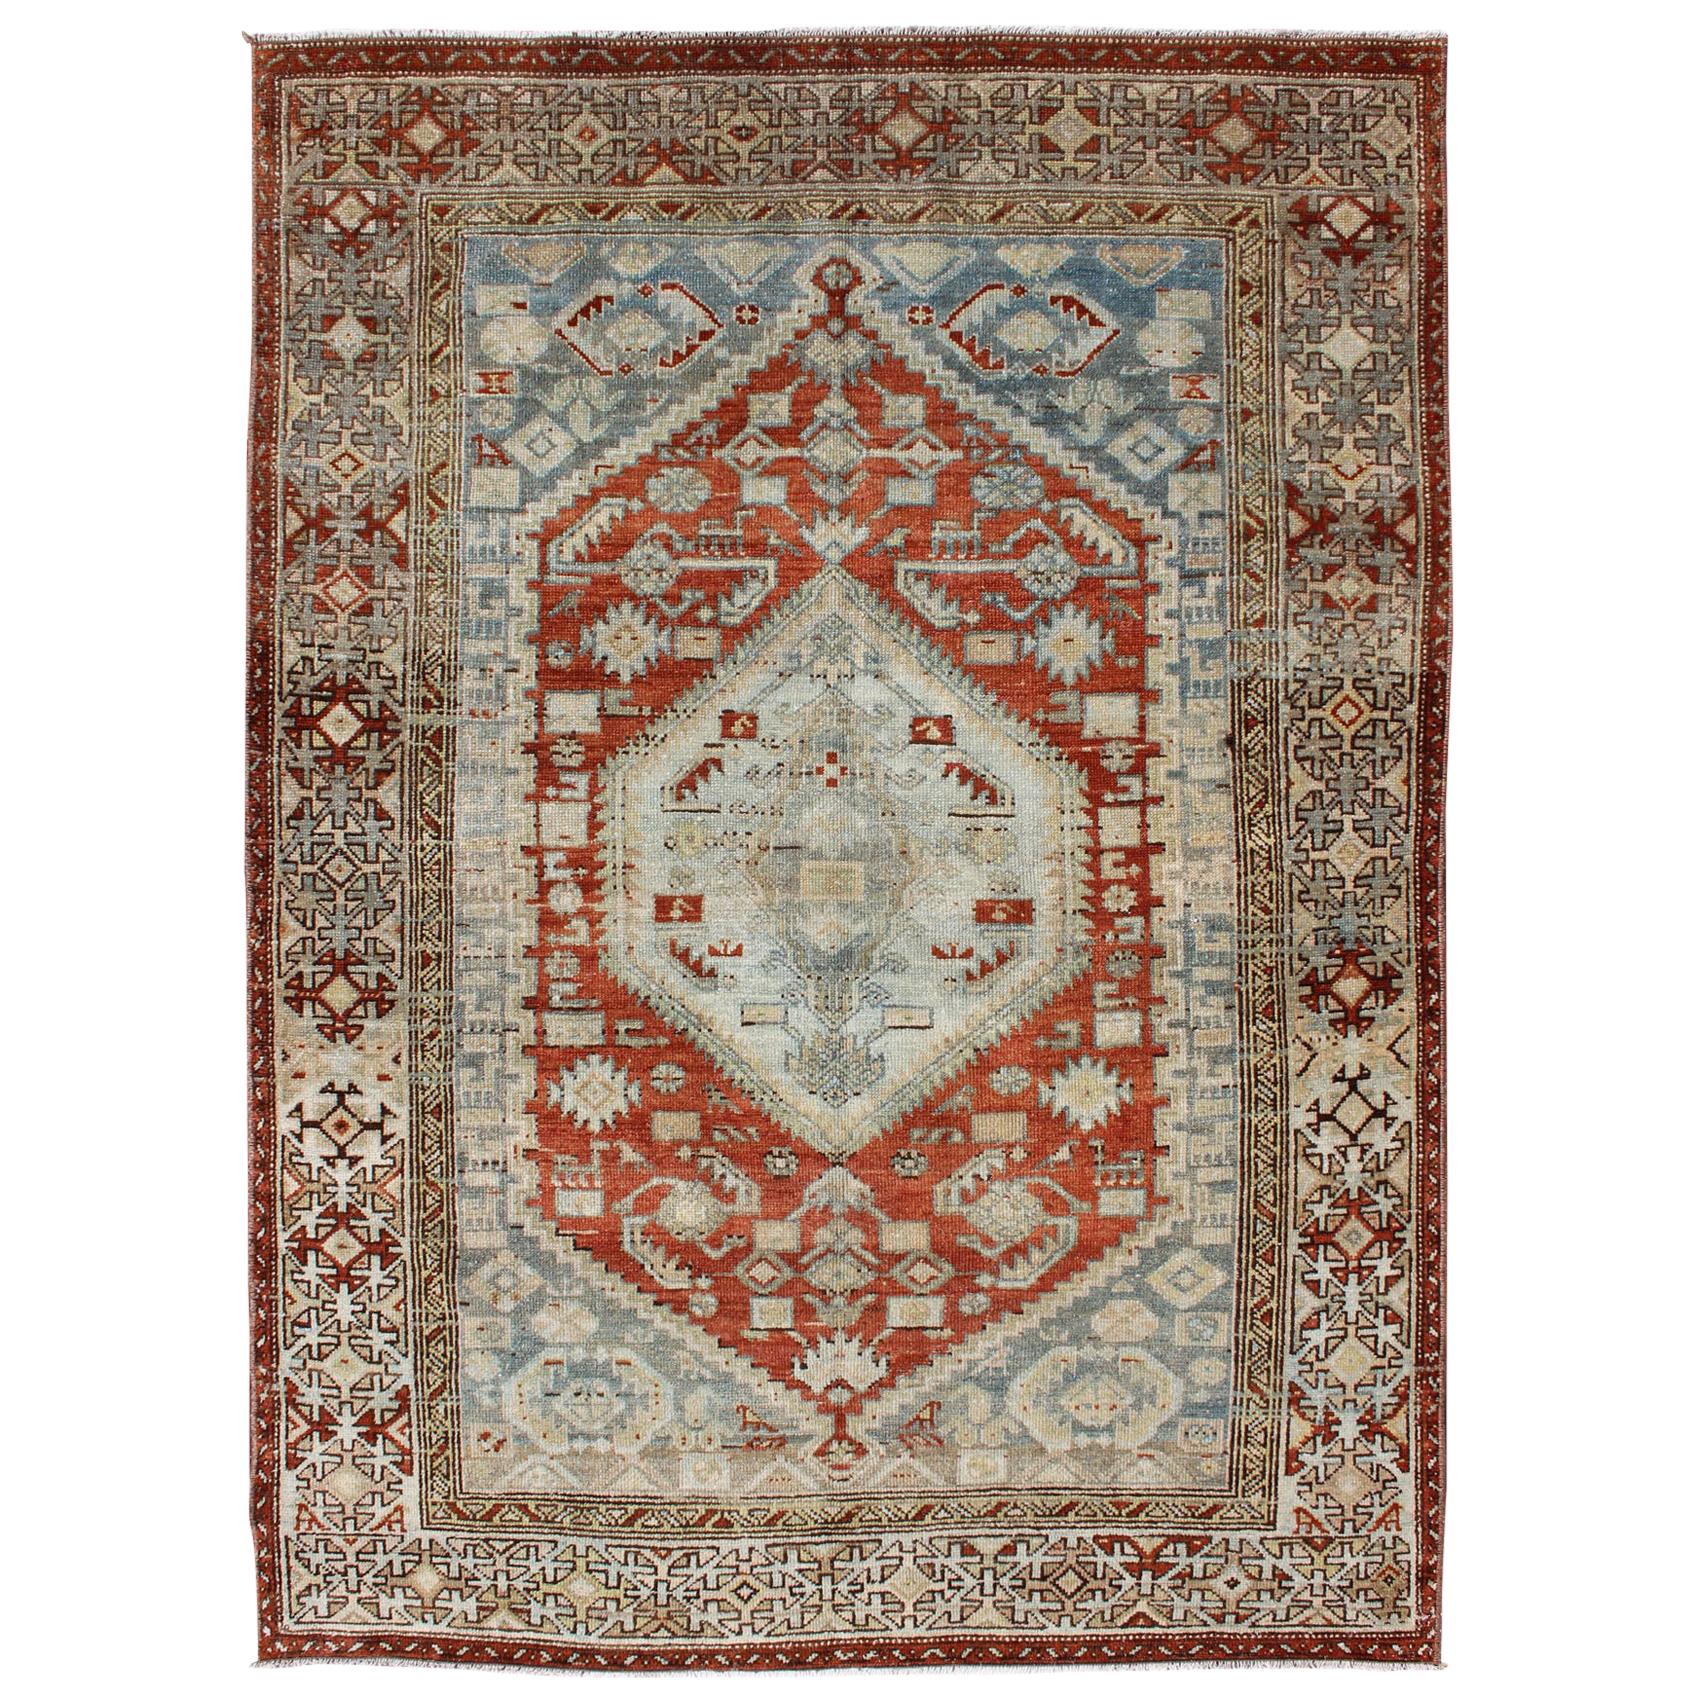 Orange-Red, Light Gray/Blue Antique Persian Malayer Rug with Geometric Design